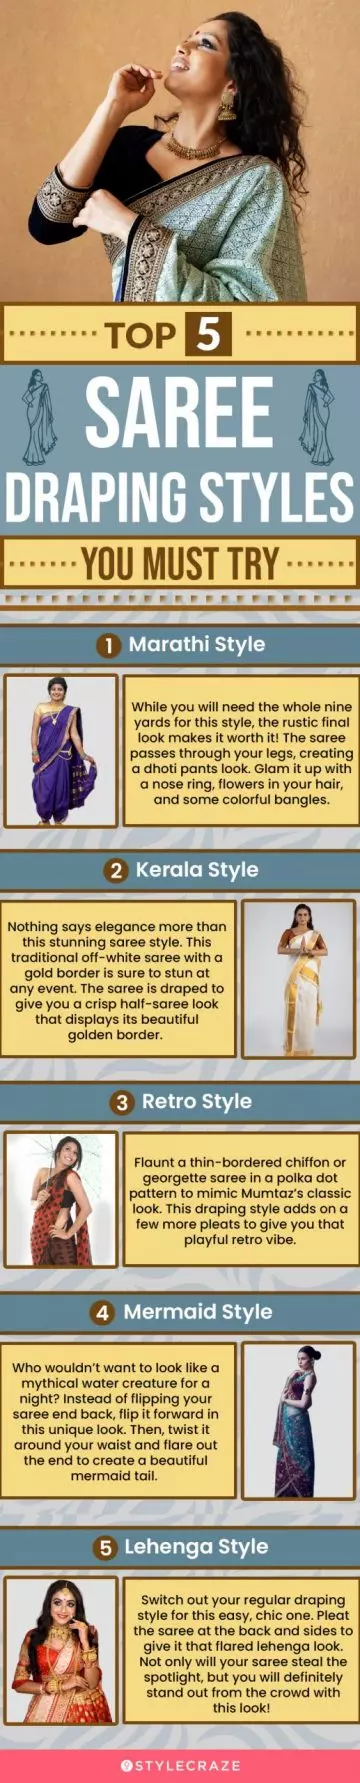 top 5 saree draping styles you must try (infographic)